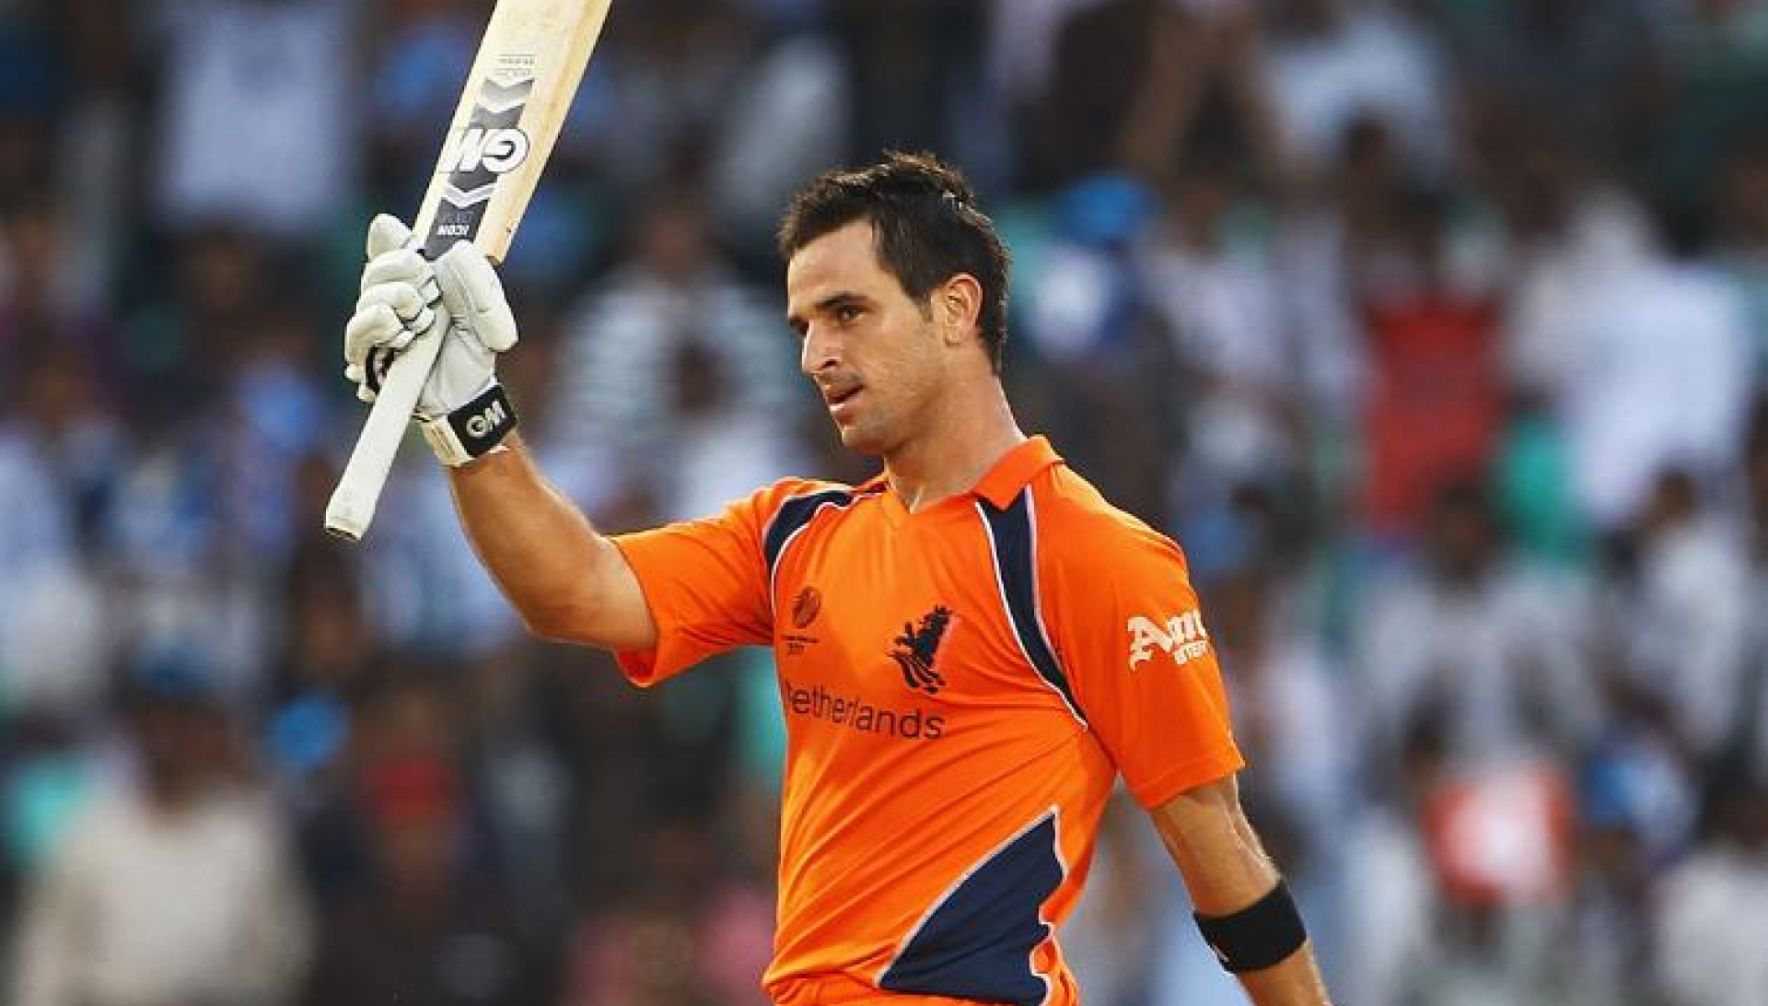 Ryan ten Doeschate to mentor the Netherlands to their tour of South Africa